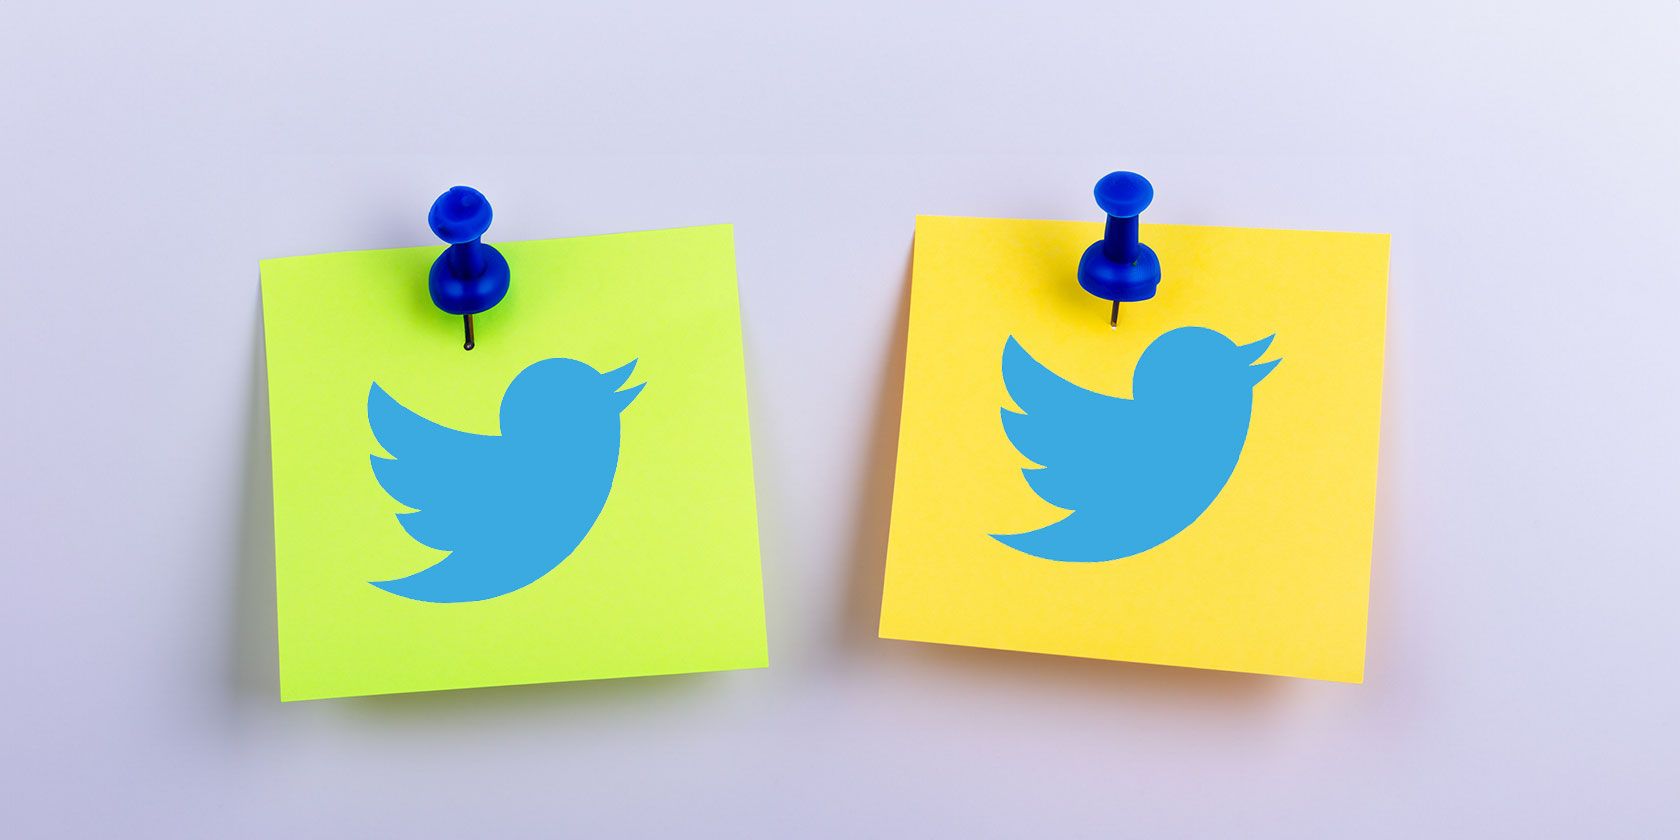 Pinned notes with twitter logo